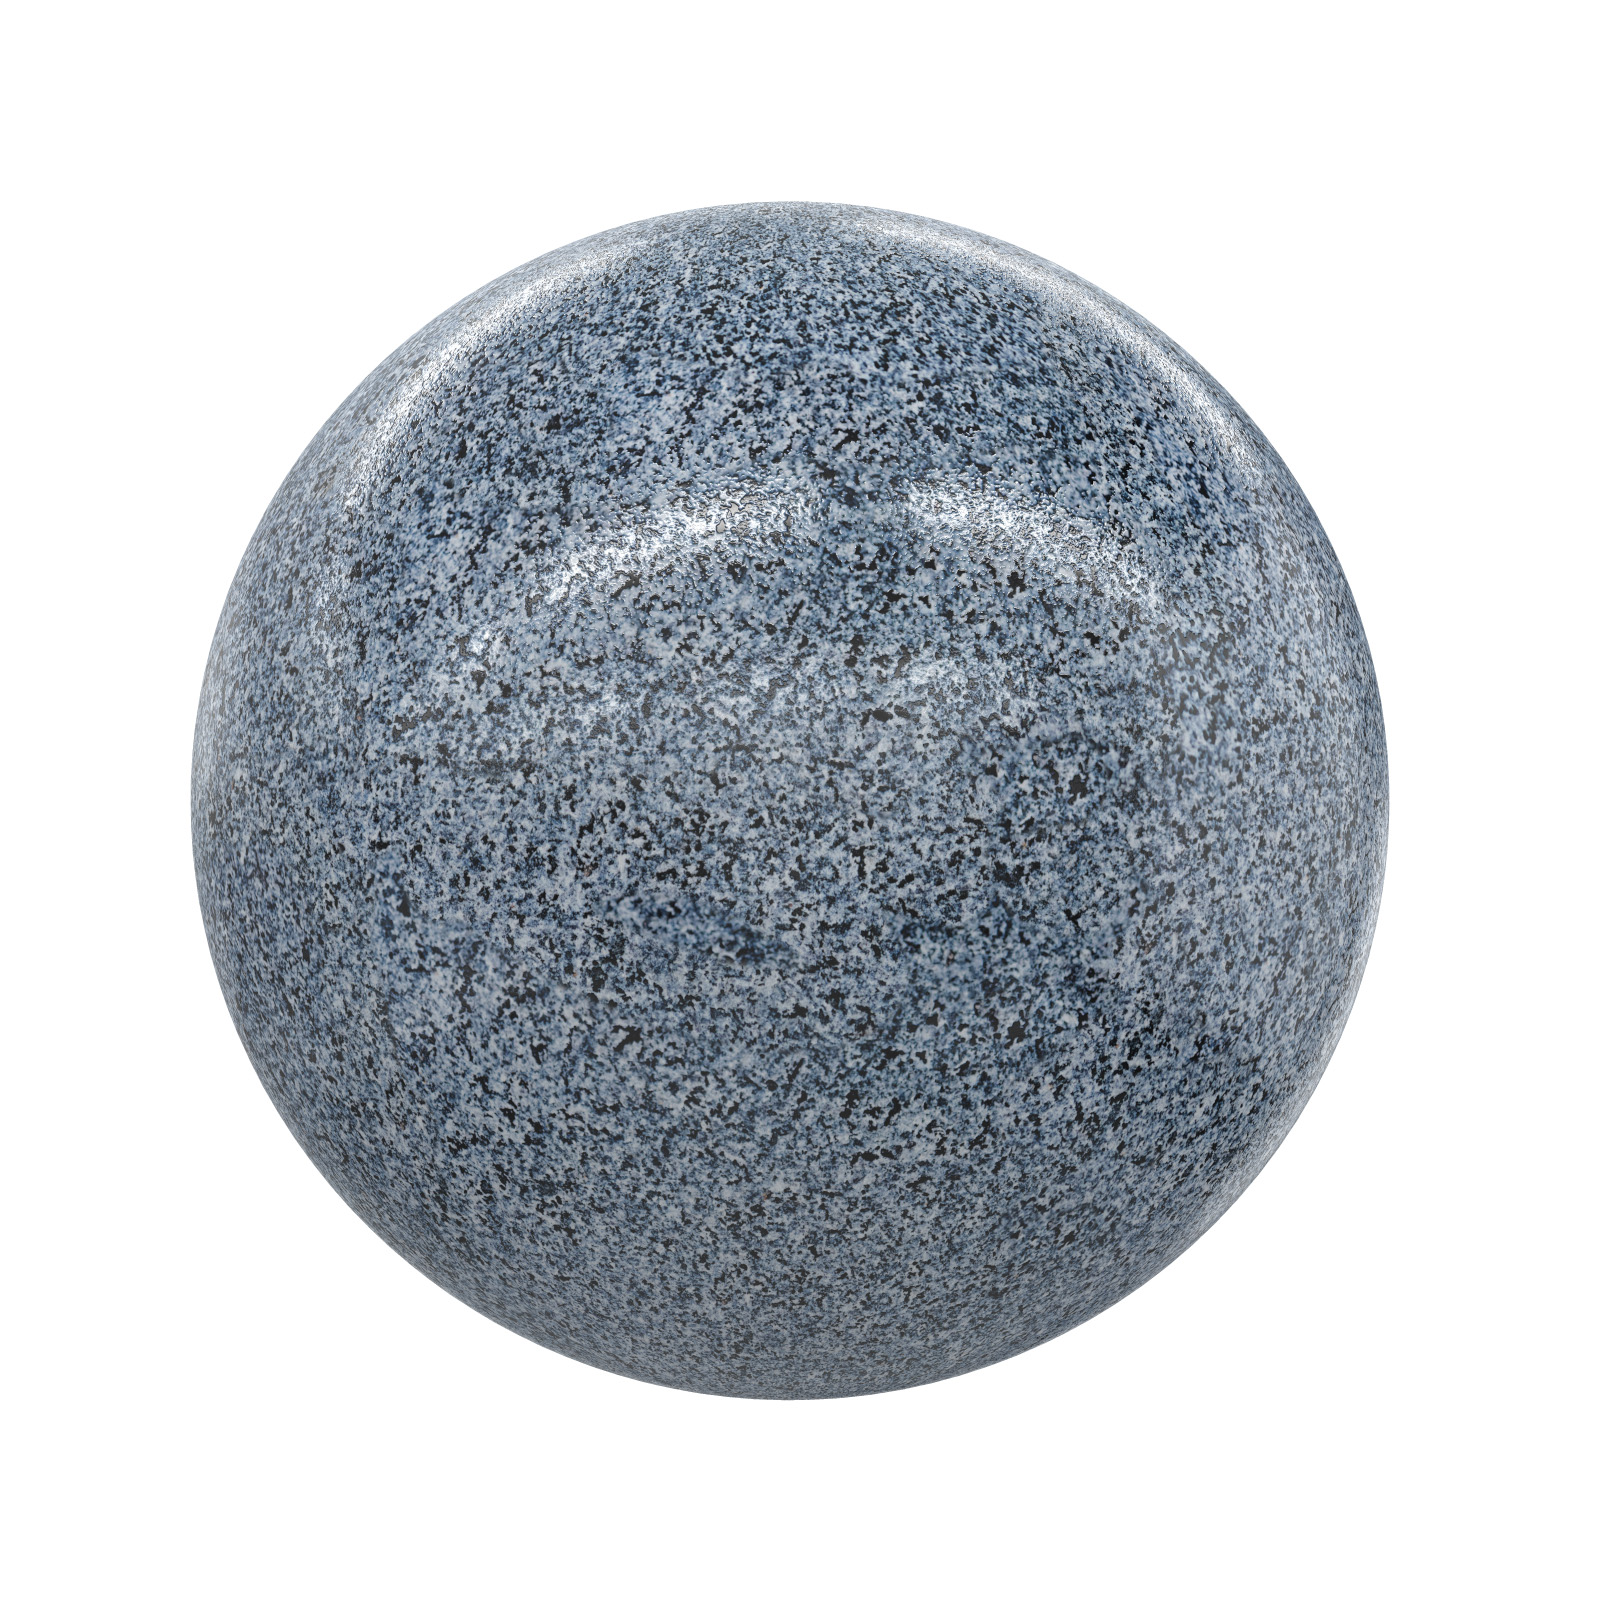 TEXTURES – STONES – CGAxis PBR Colection Vol 1 Stones – grey freckled granite - thumbnail 1